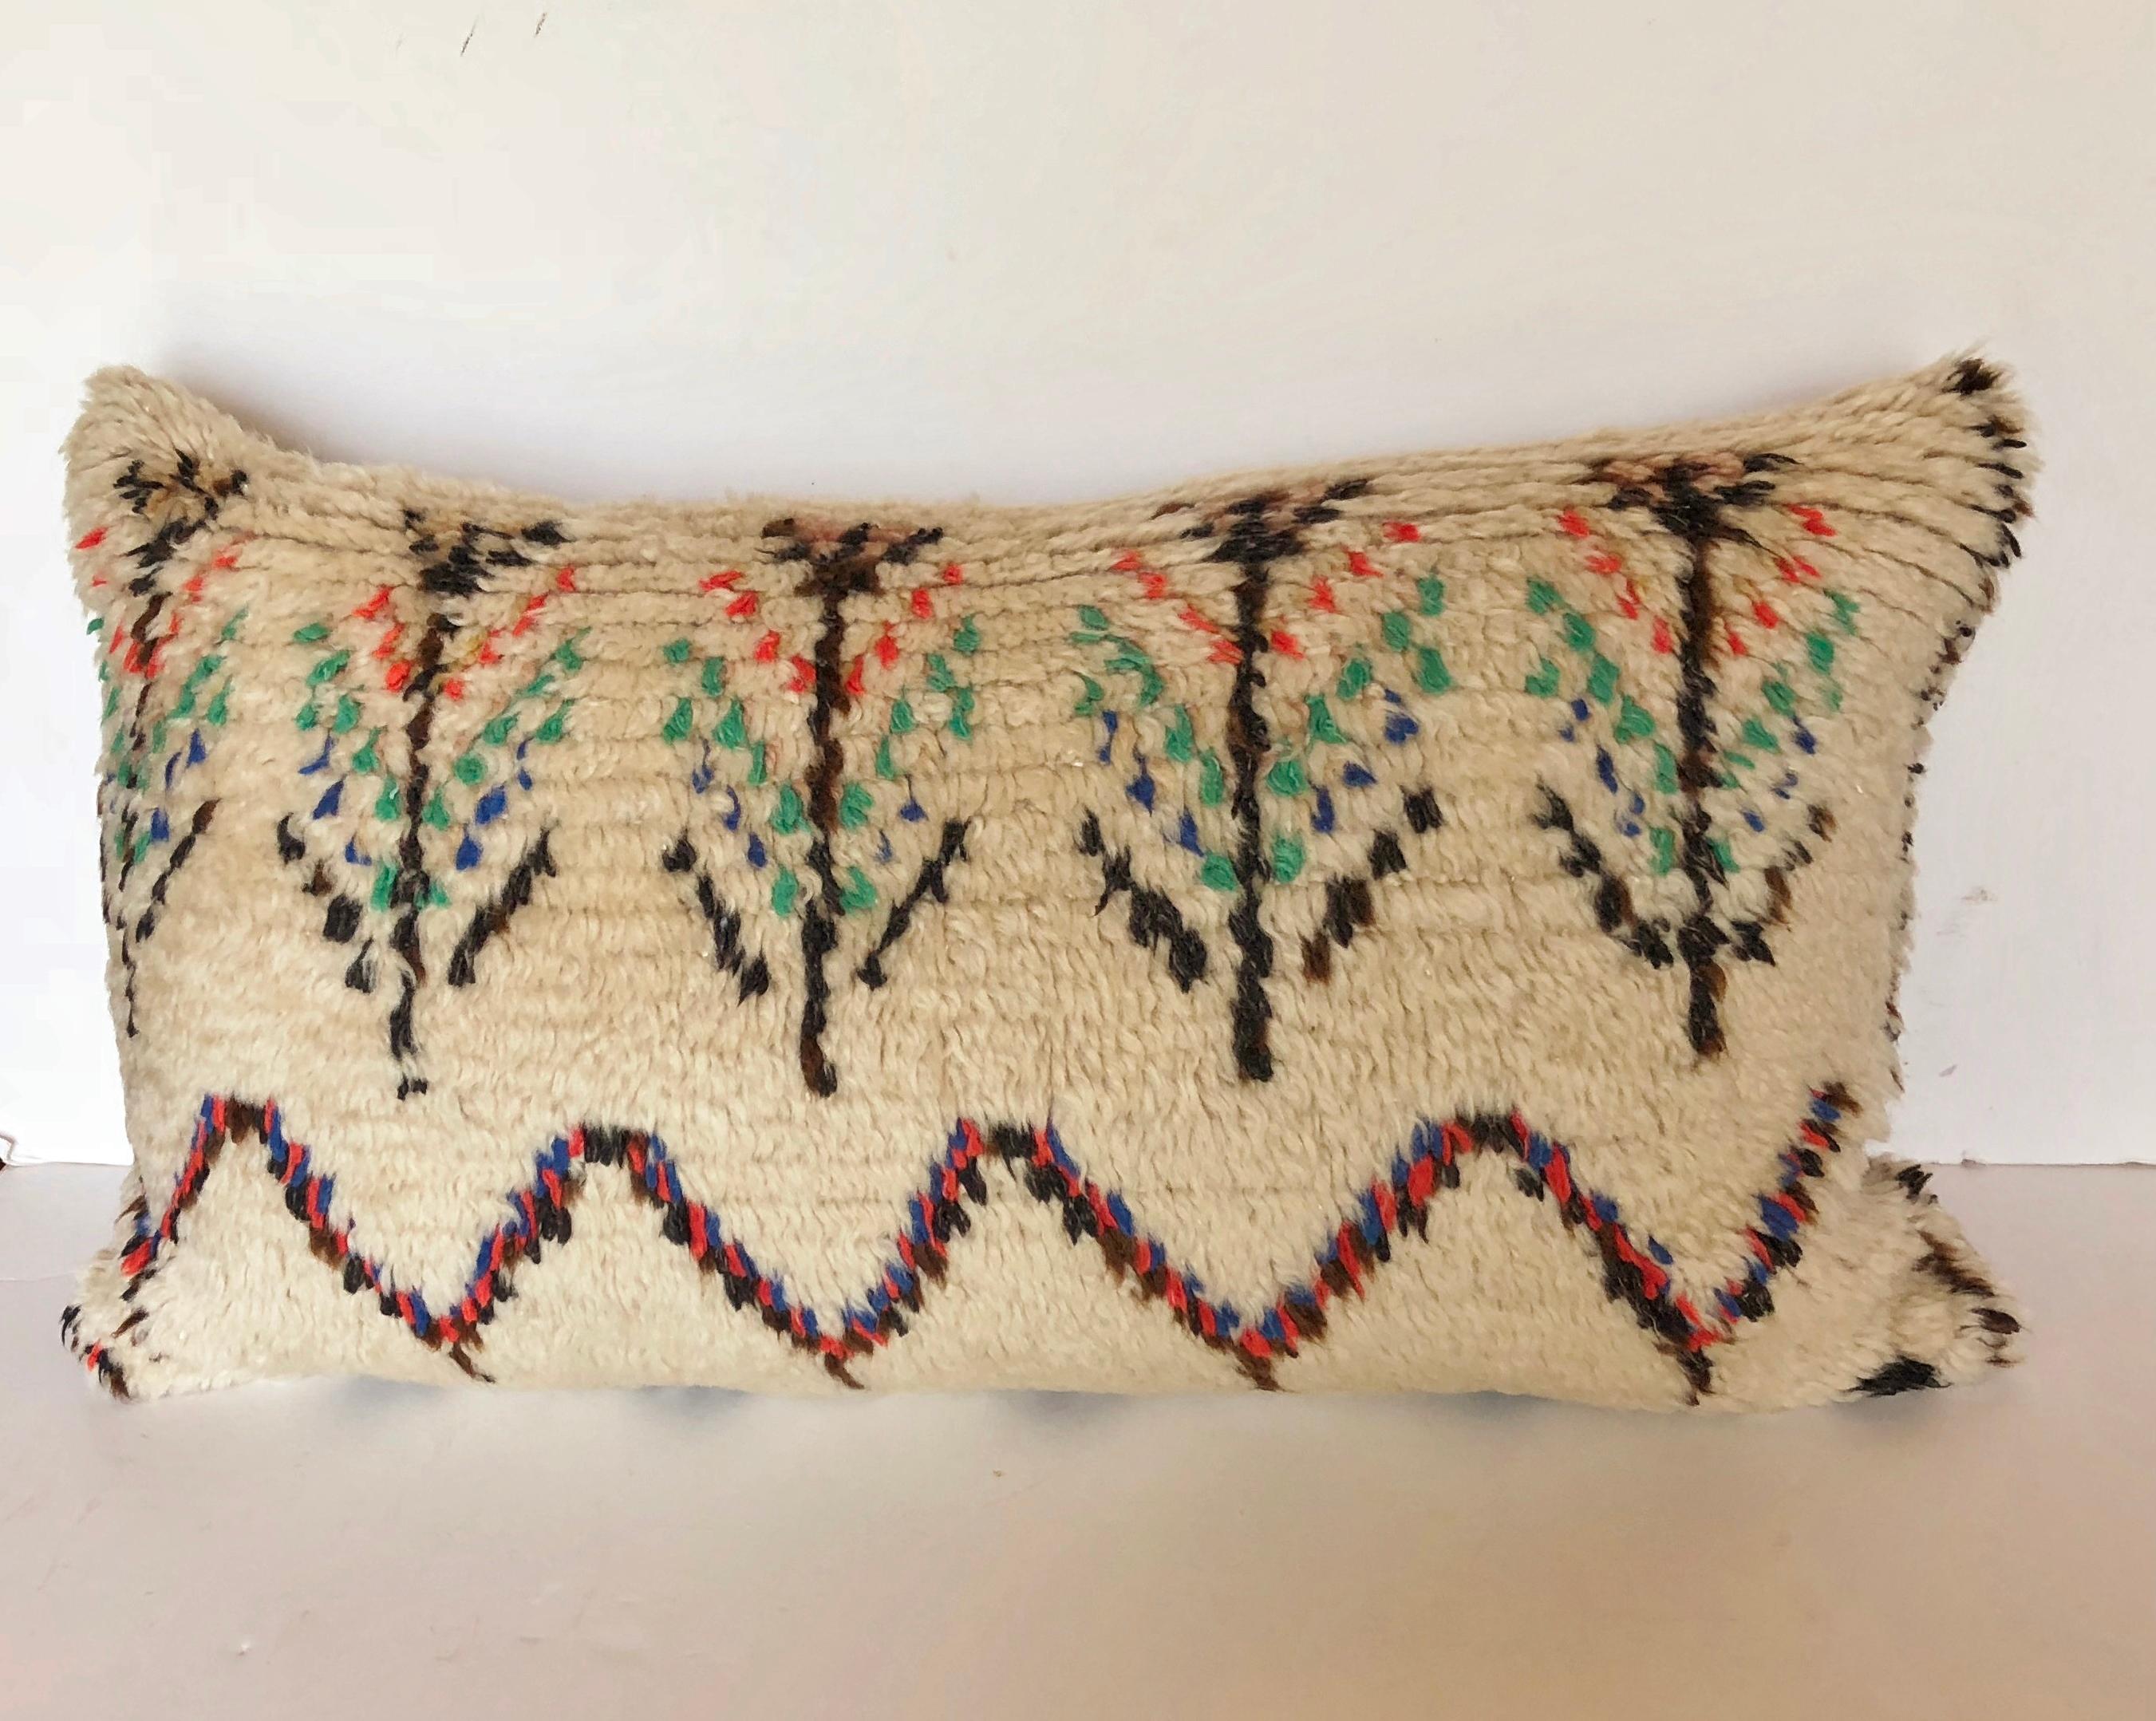 Custom pillow cut from a vintage hand loomed wool Moroccan Azilal rug from the Atlas Mountains. Wool is soft and lustrous with all natural dyes. Pillow is backed in cream mohair, filled with a 100% down insert and hand sewn closed. We make all of